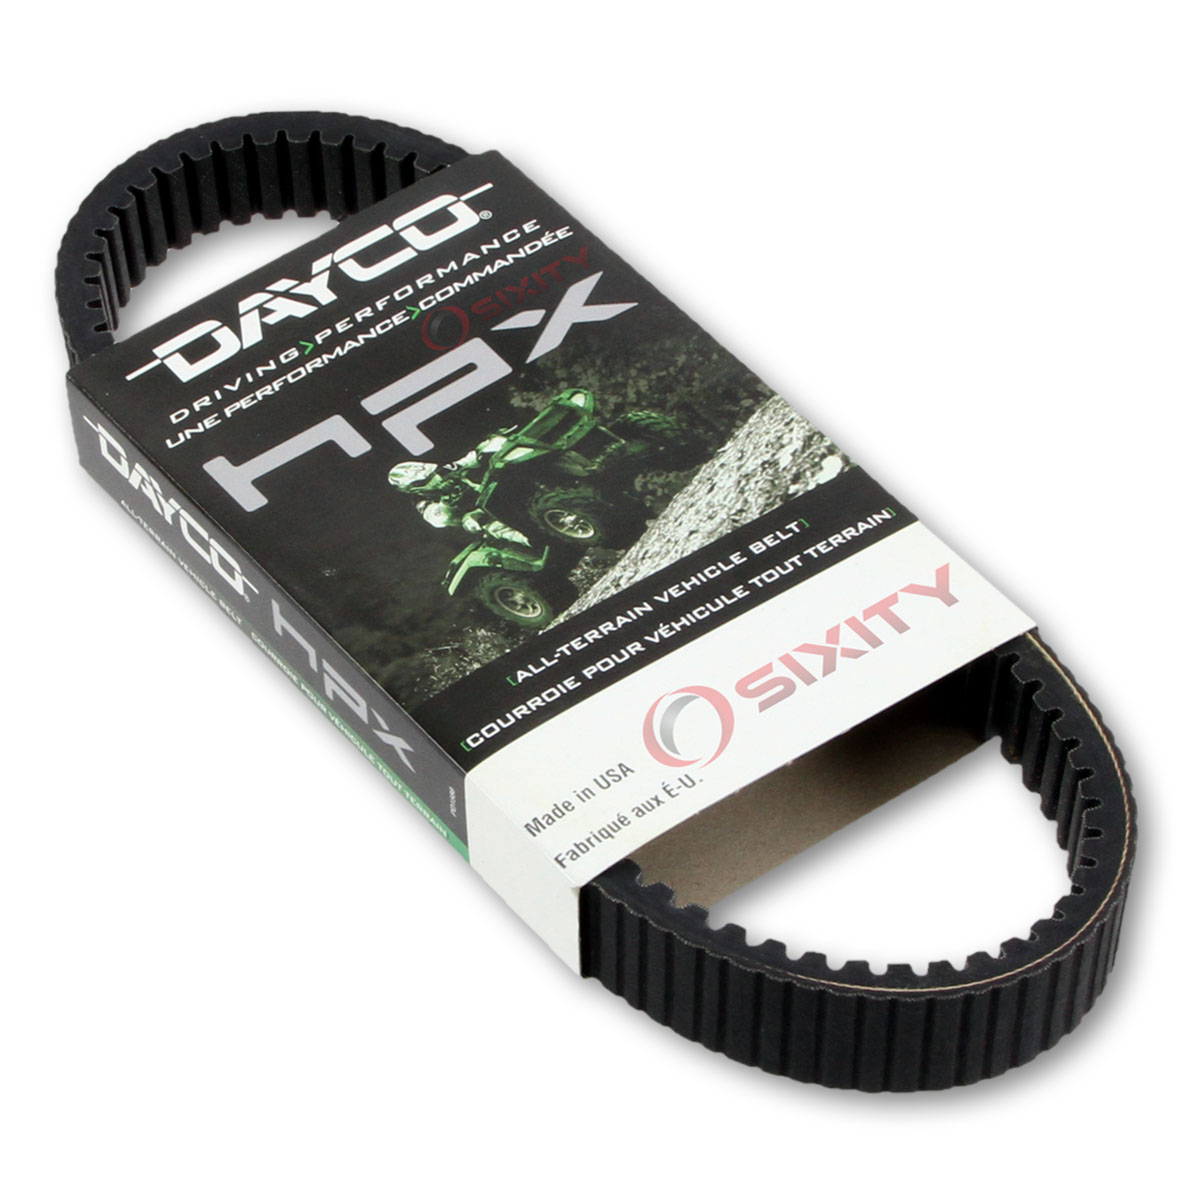 Dayco HPX Drive Belt for 2011 Arctic Cat 550 TRV Cruiser - High Performance